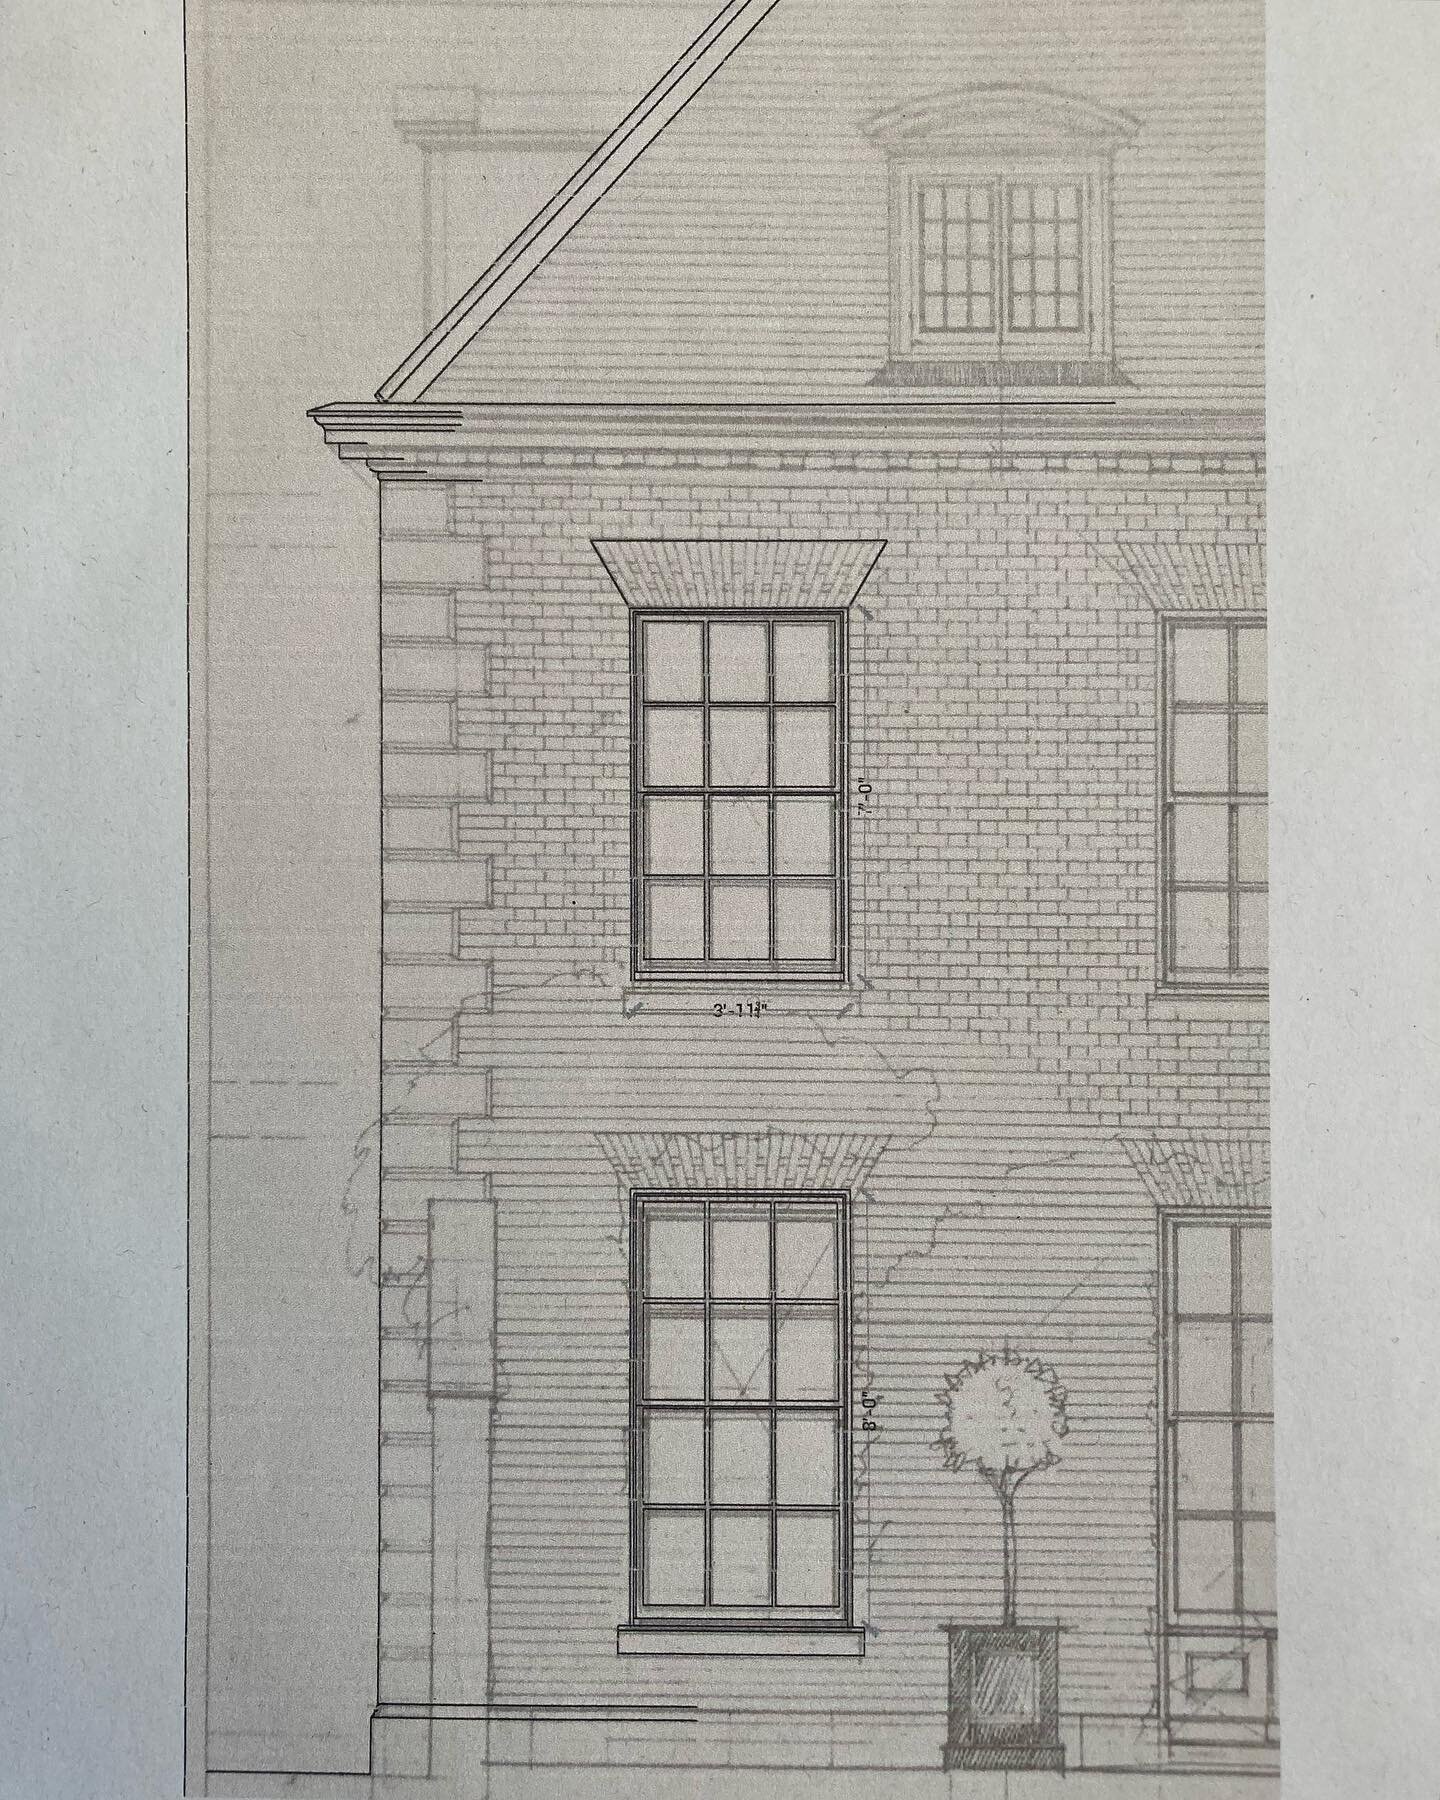 Going old school and drawing the details for this new house at large scale&hellip;it&rsquo;s the only way to design.

#simonaldridgearchitect #drawingoftheday